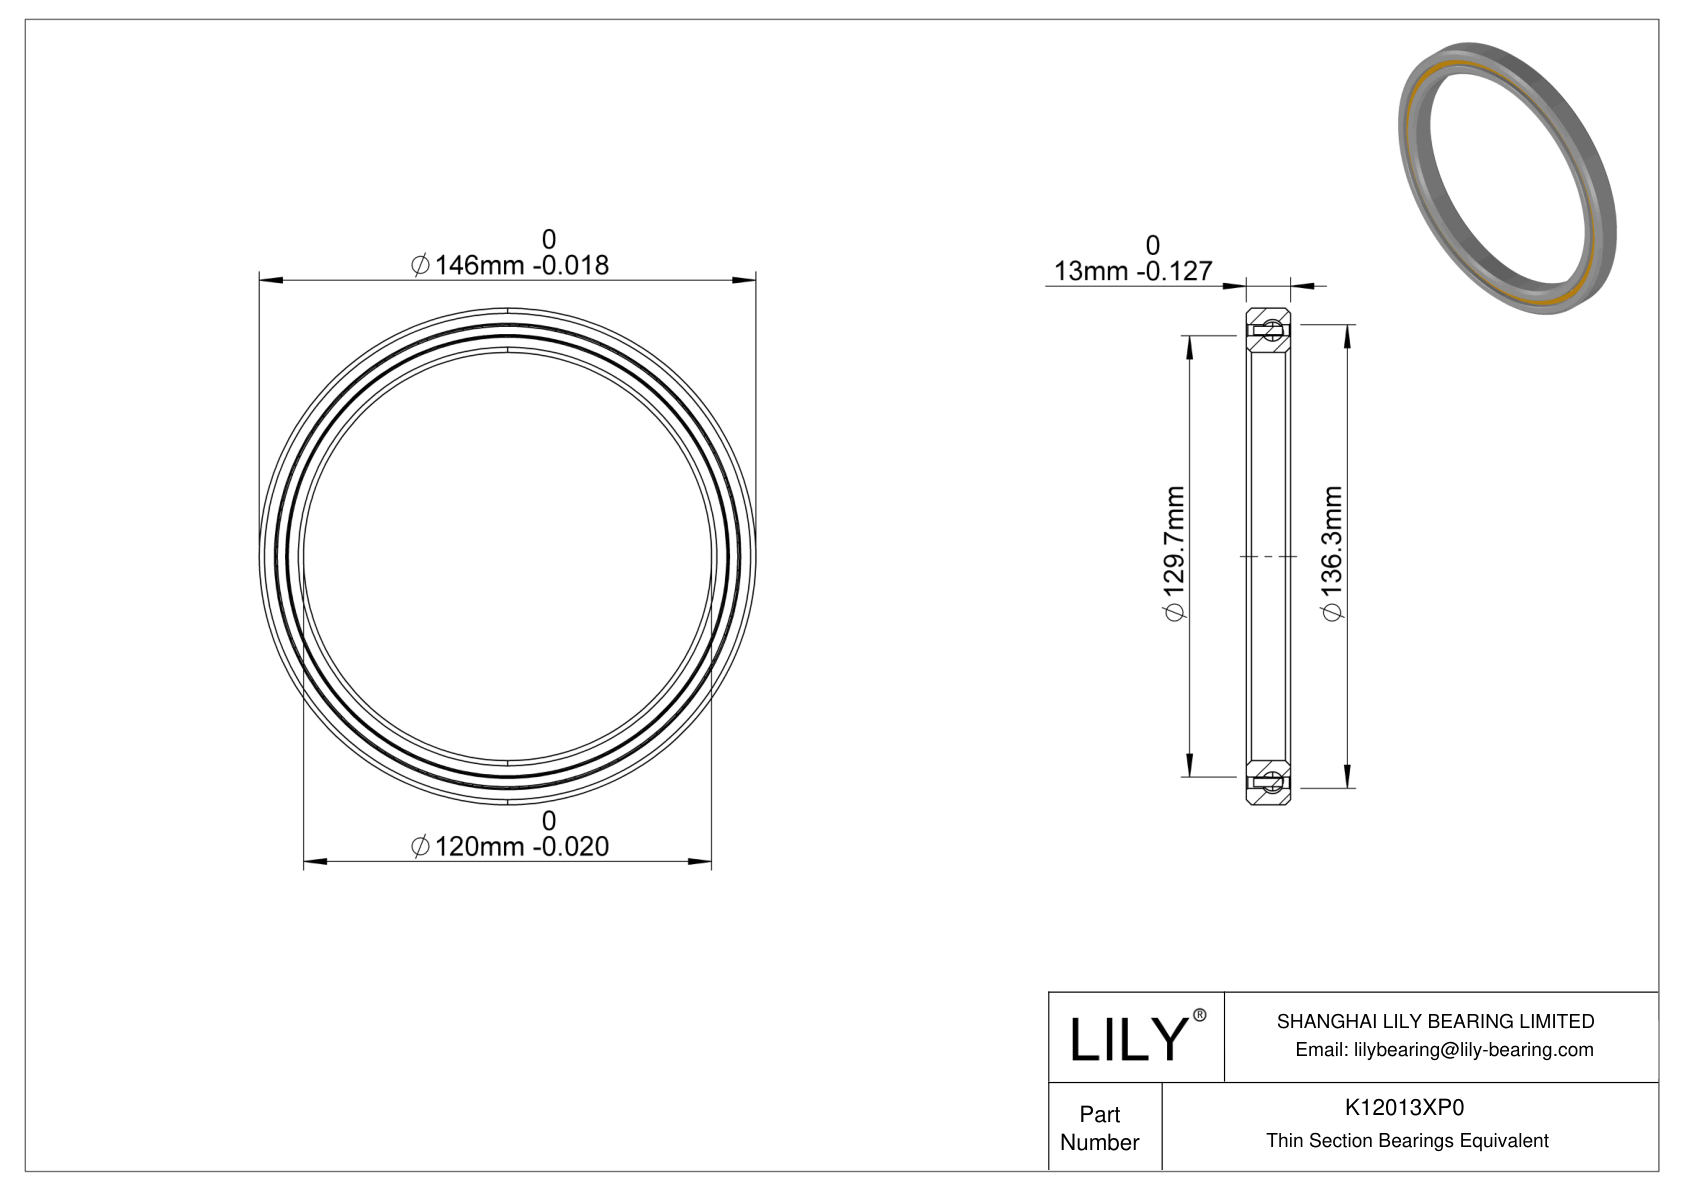 K12013XP0 Constant Section (CS) Bearings cad drawing